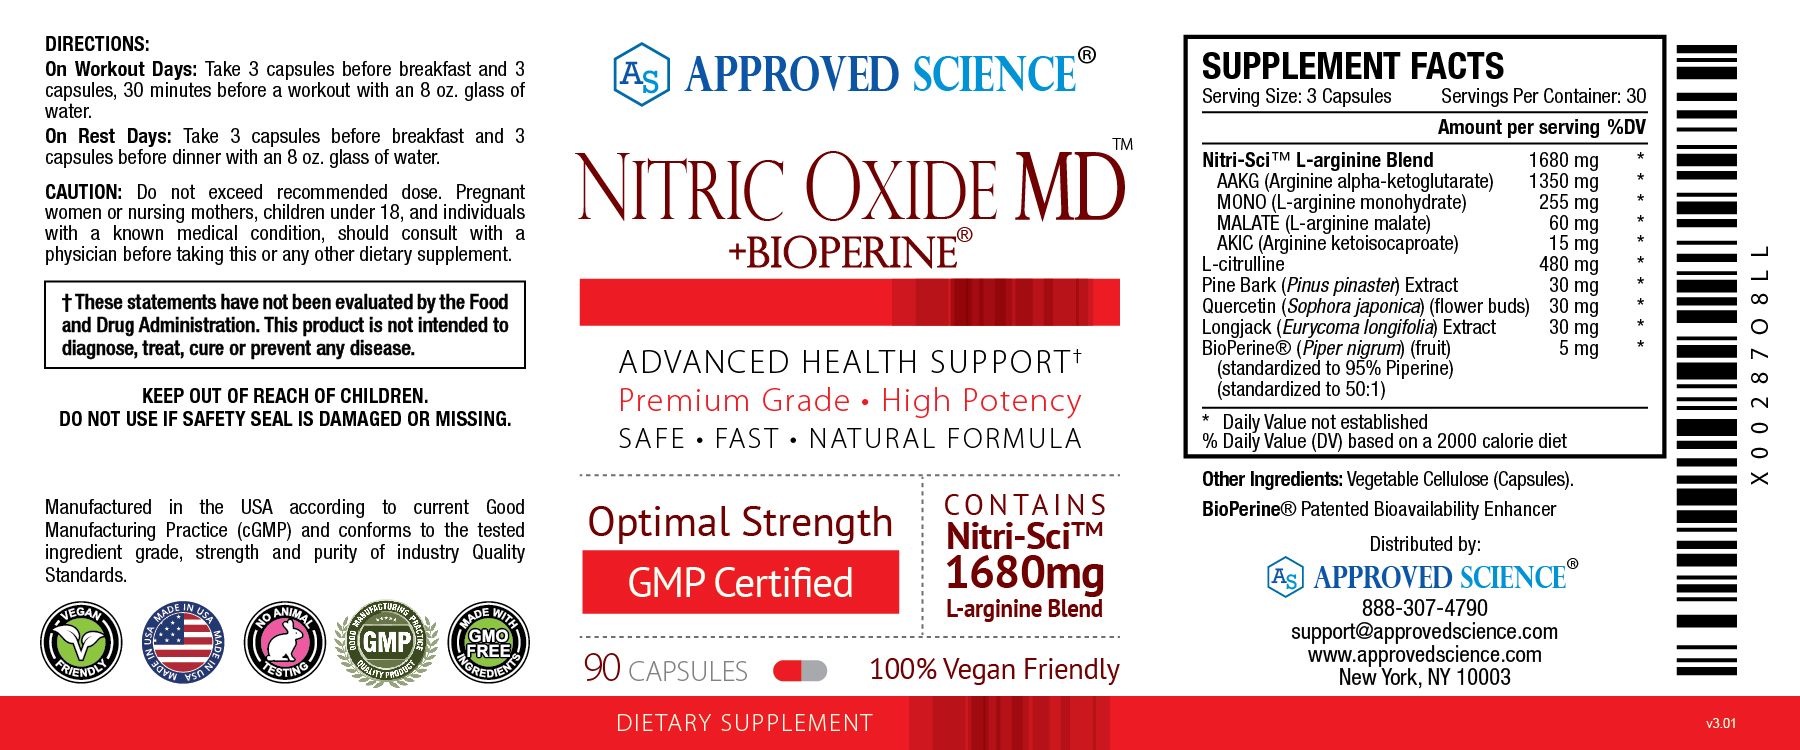 Nitric Oxide MD™ Supplement Facts